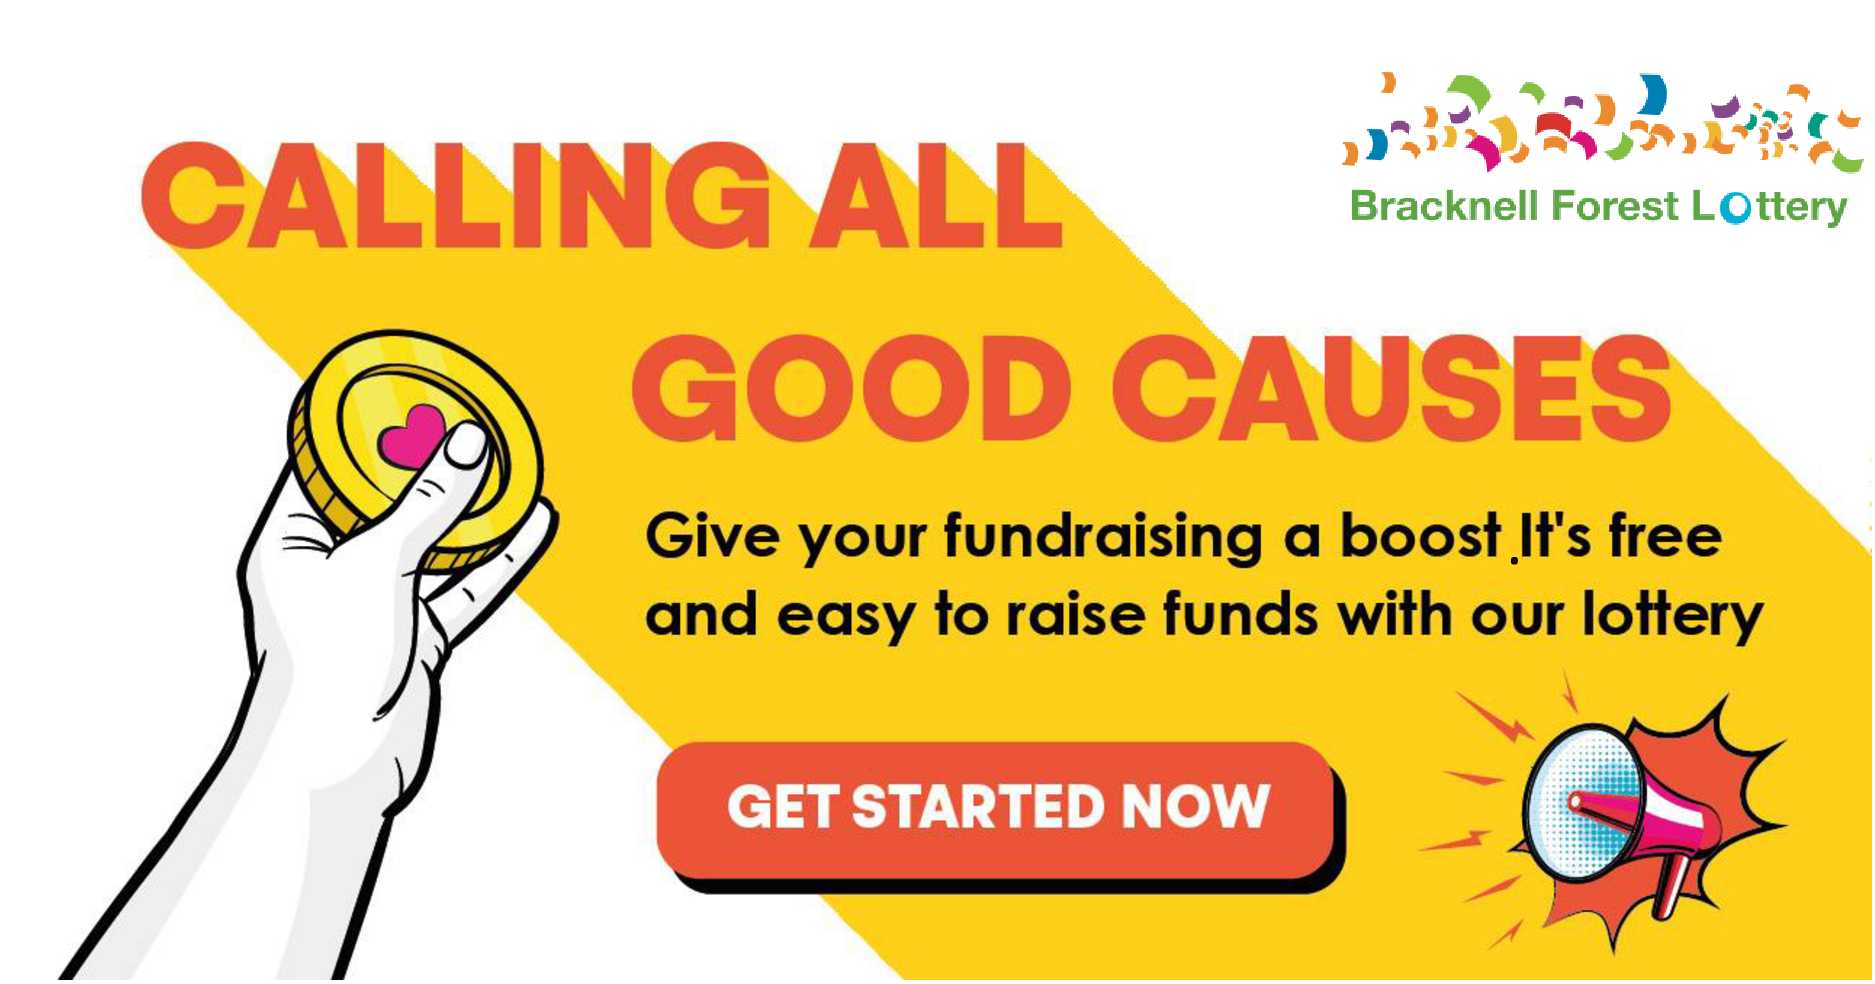 Calling all good causes to give your fundraising a boost. It's free and easy to raise funds with our lottery